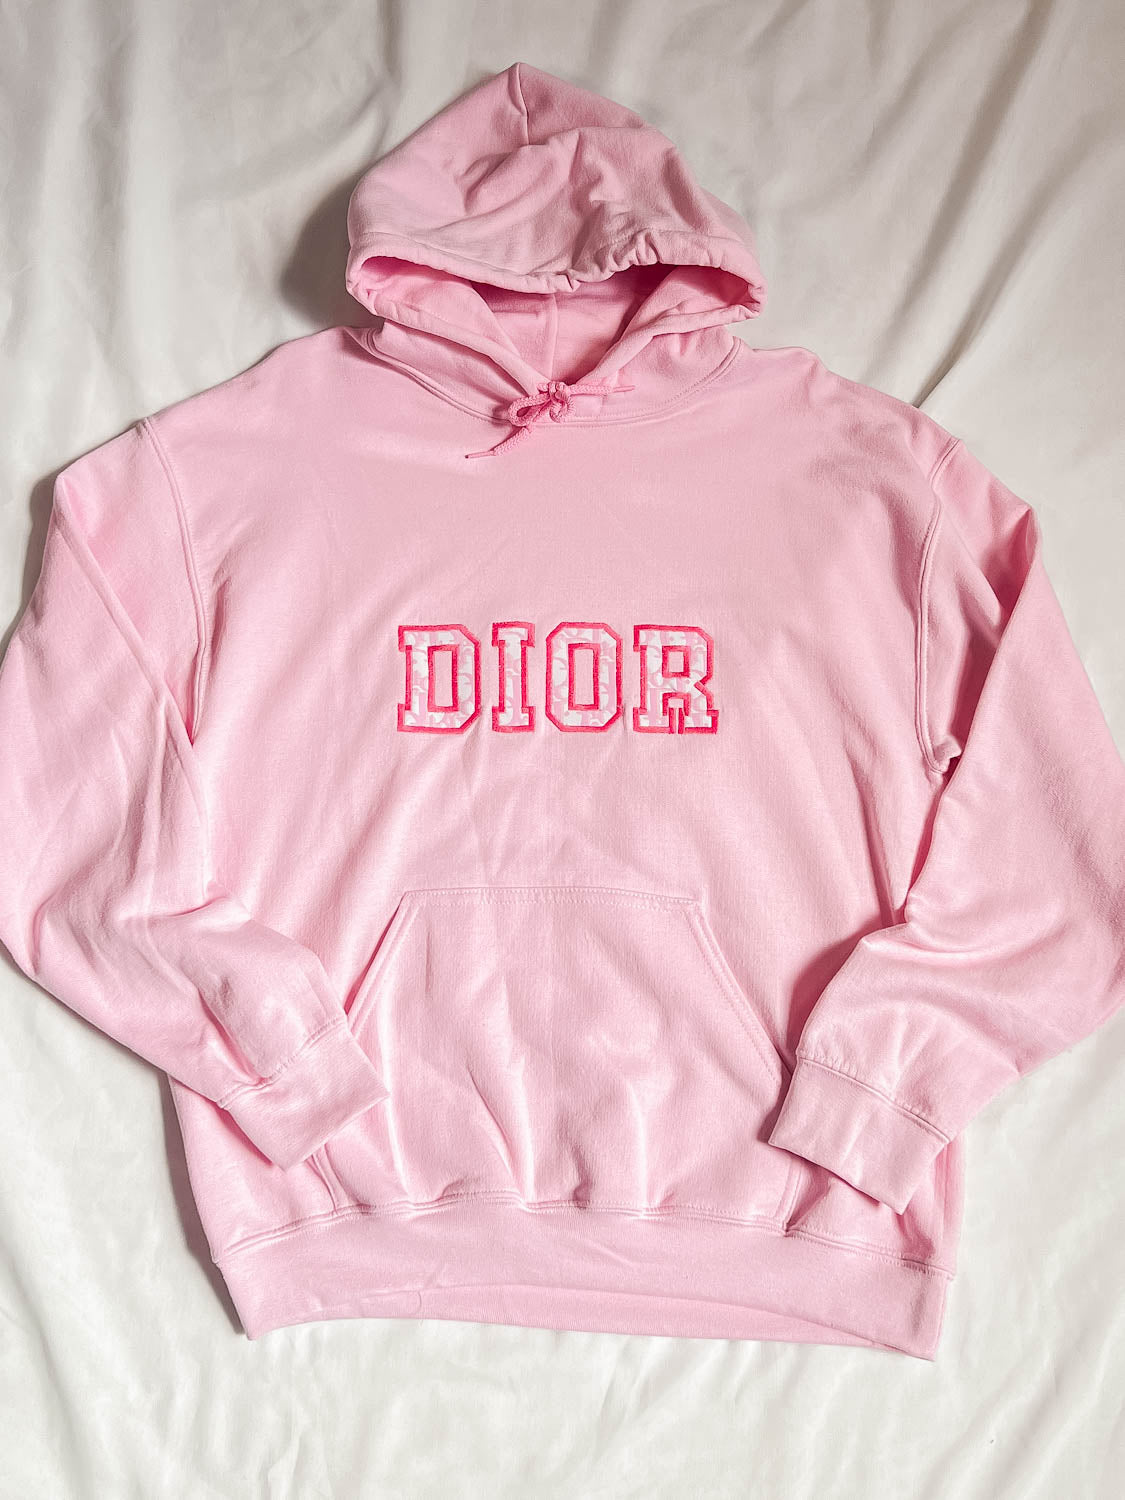 ONE OFF - Dio Varsity Embroidered Pink Hoodie Small